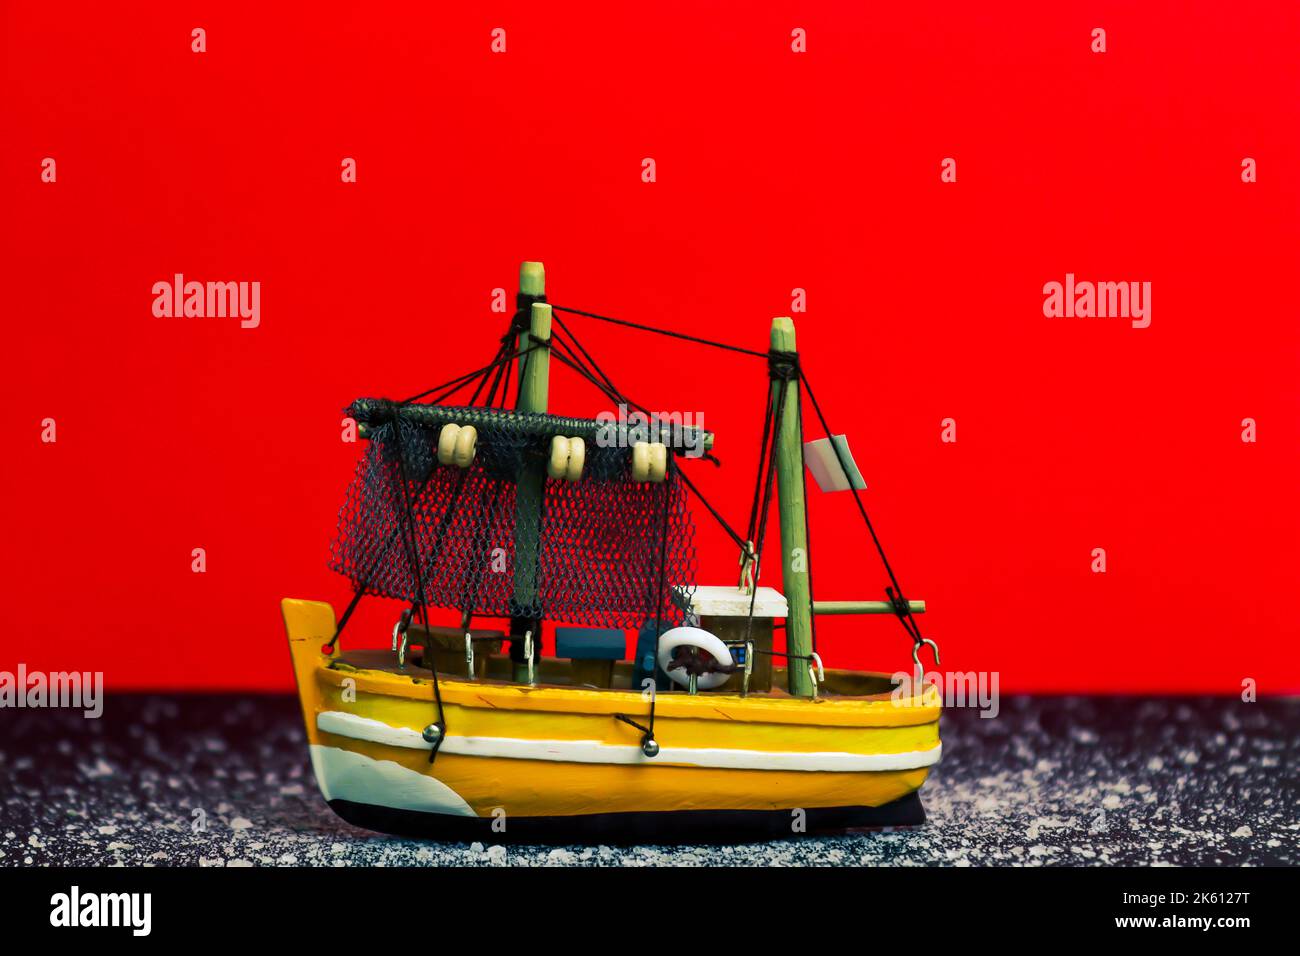 https://c8.alamy.com/comp/2K6127T/ship-toy-on-a-red-background-with-some-specific-elements-2K6127T.jpg